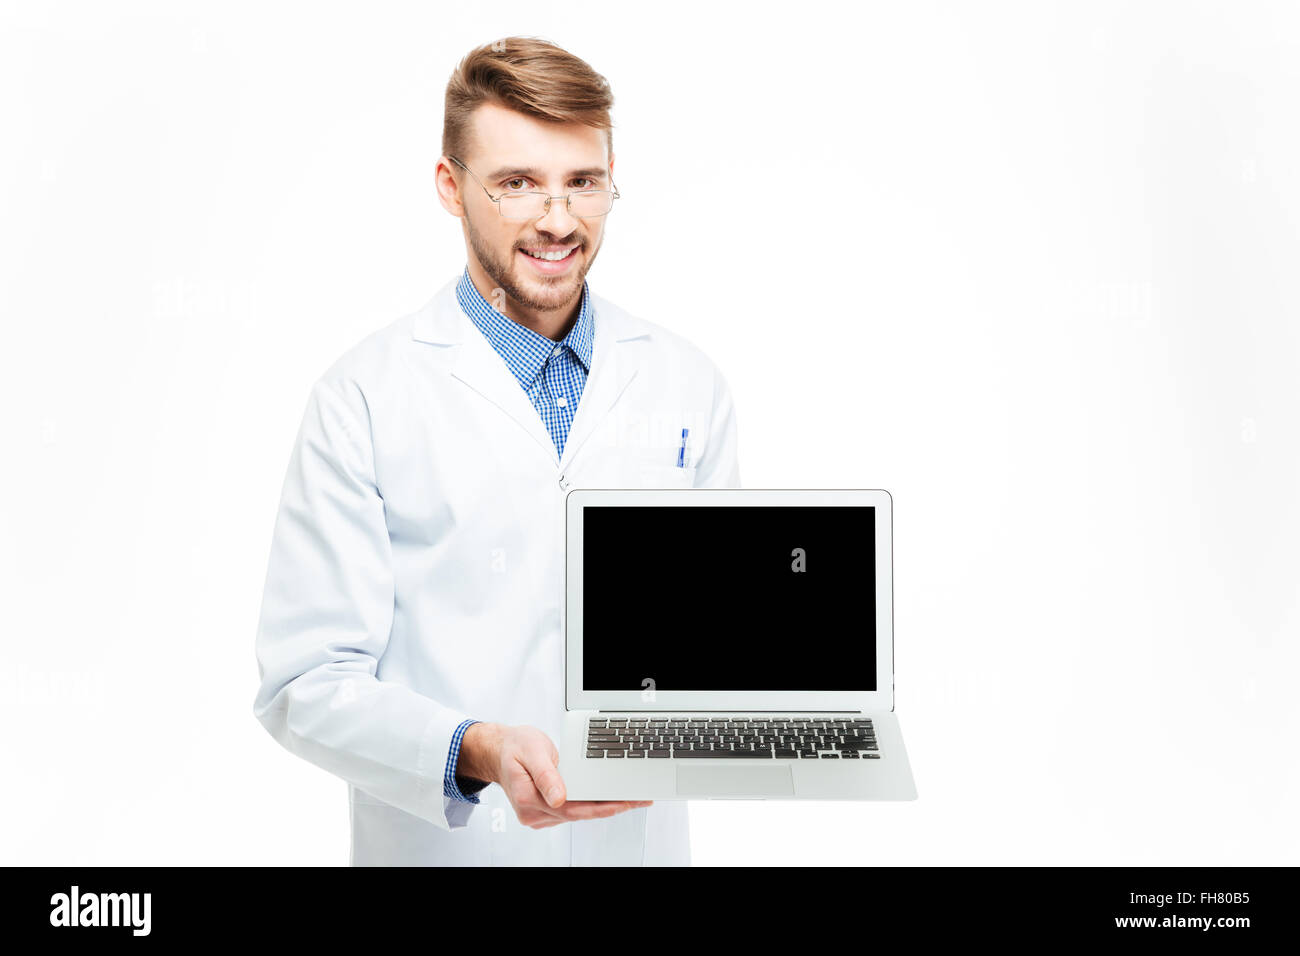 Male doctor showing blank laptop computer screen isolated on a white background Stock Photo